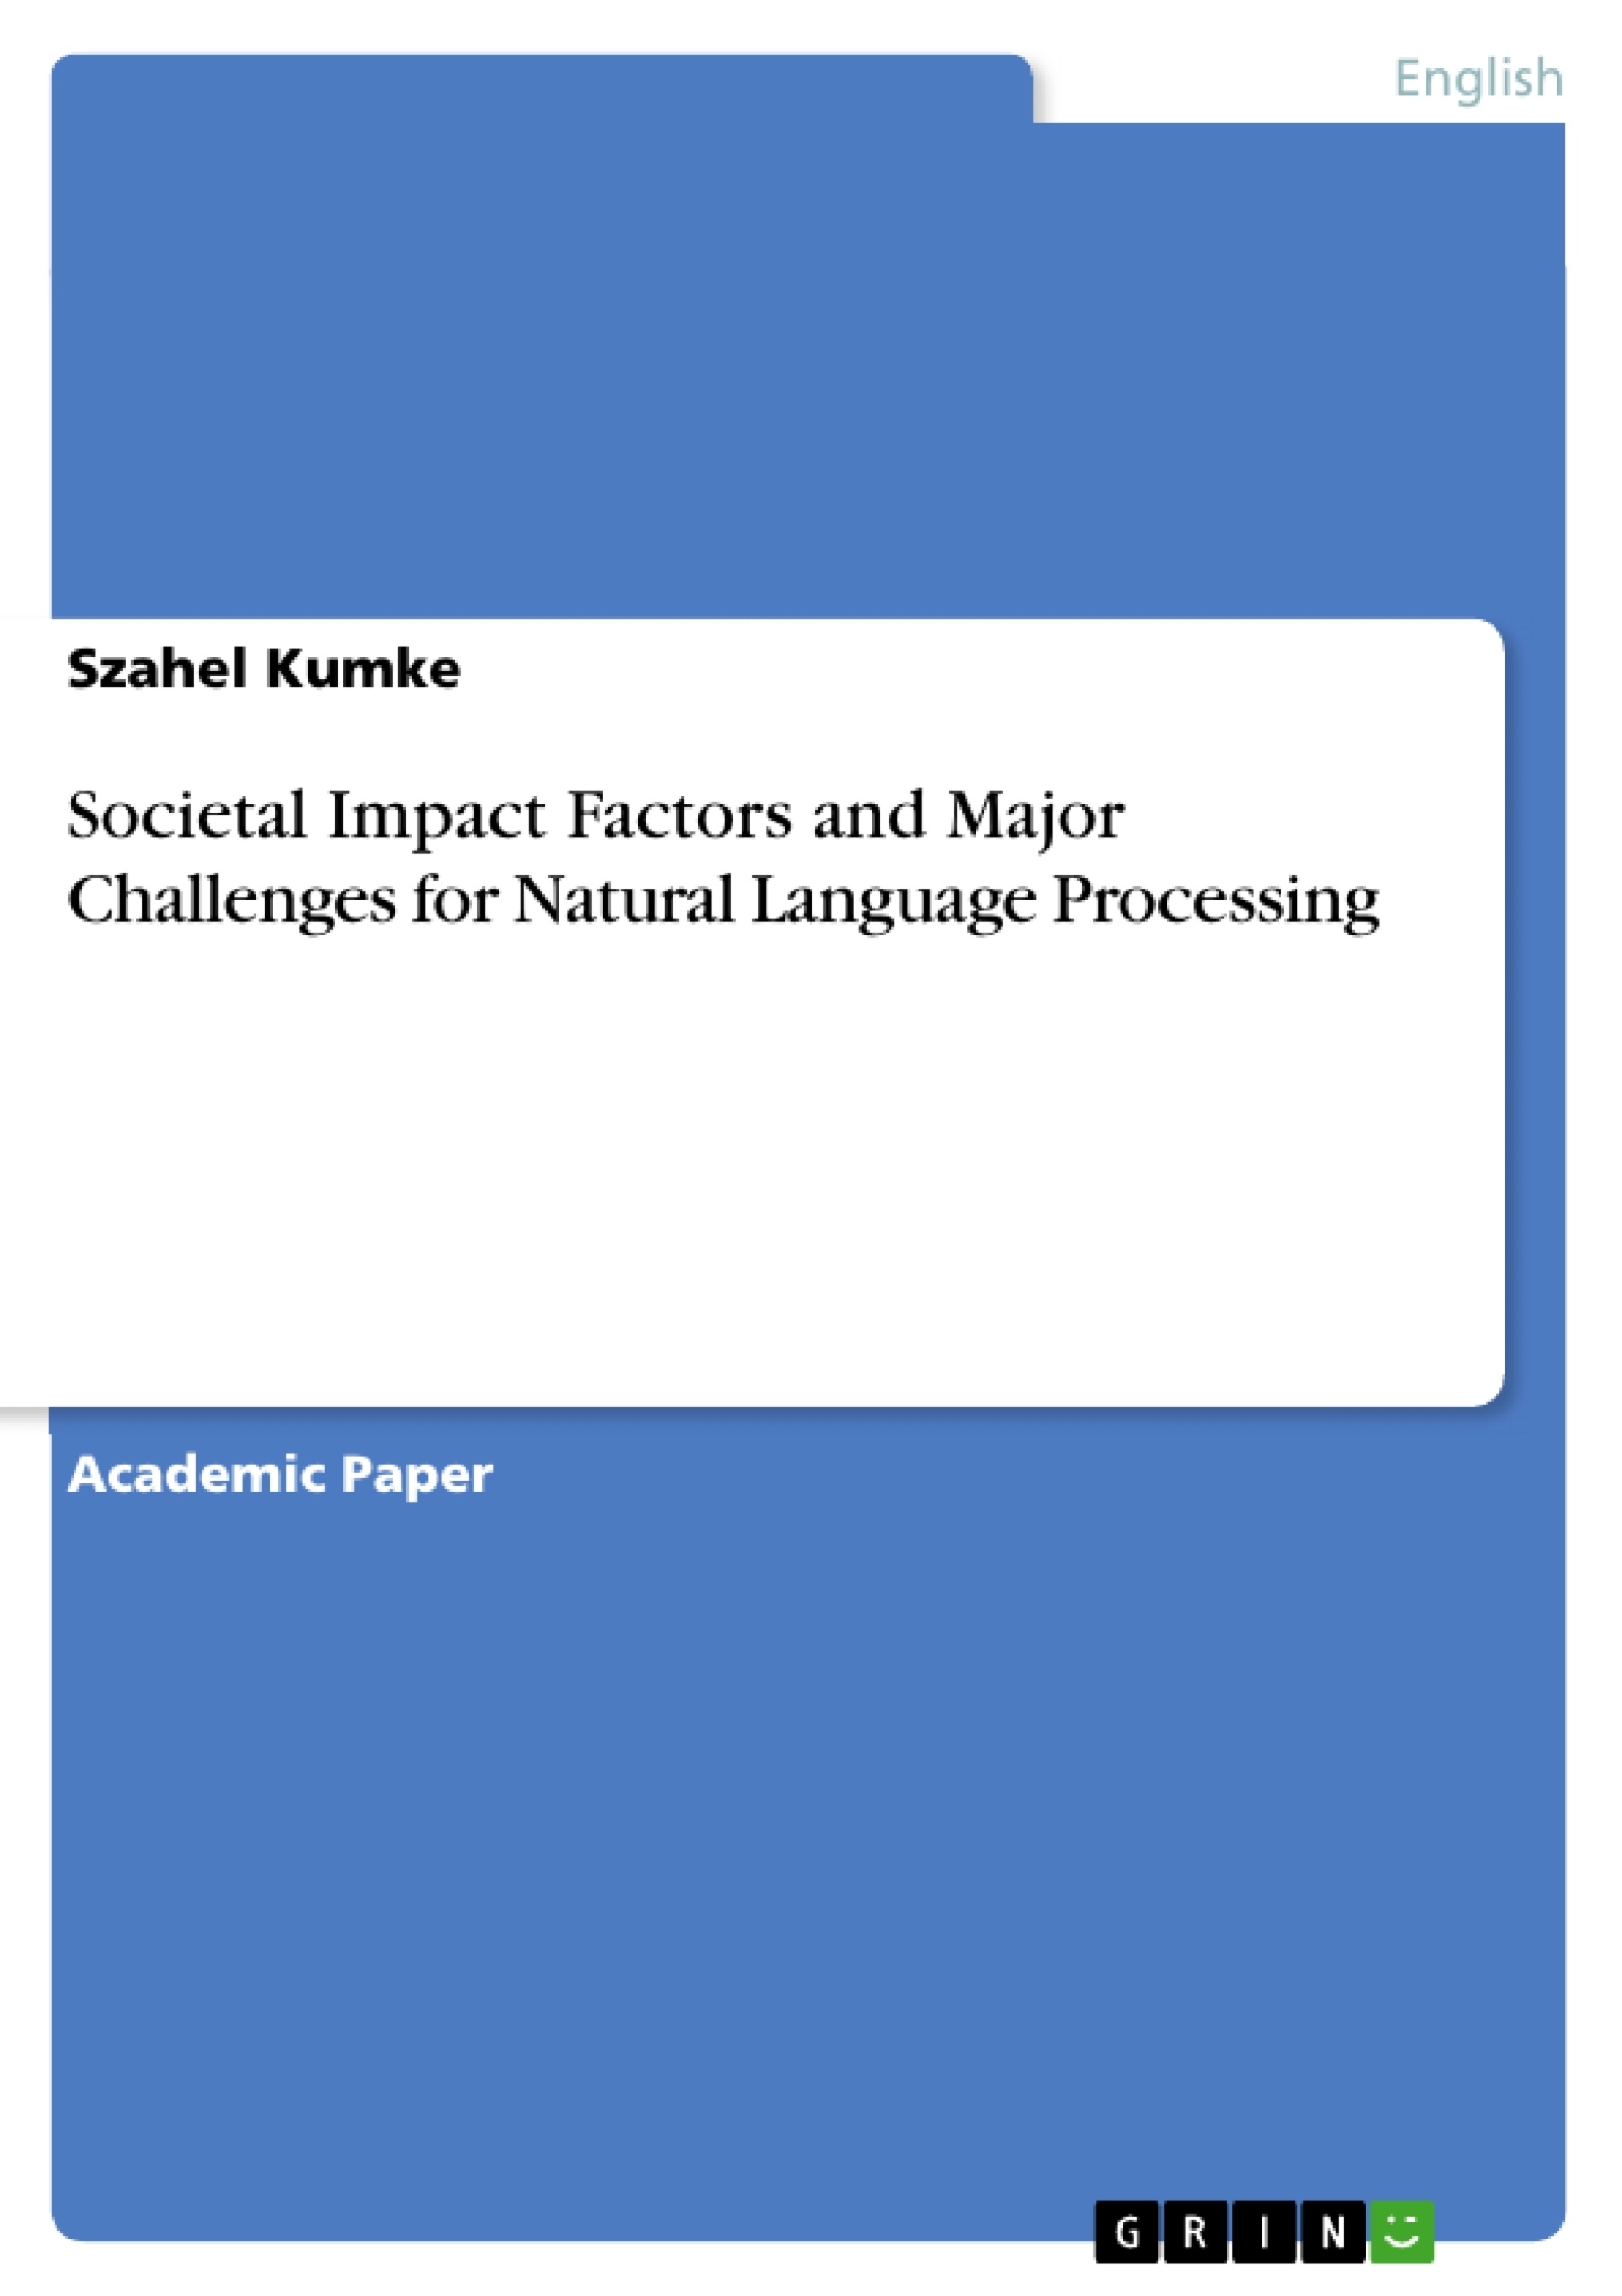 Título: Societal Impact Factors and Major Challenges for Natural Language Processing